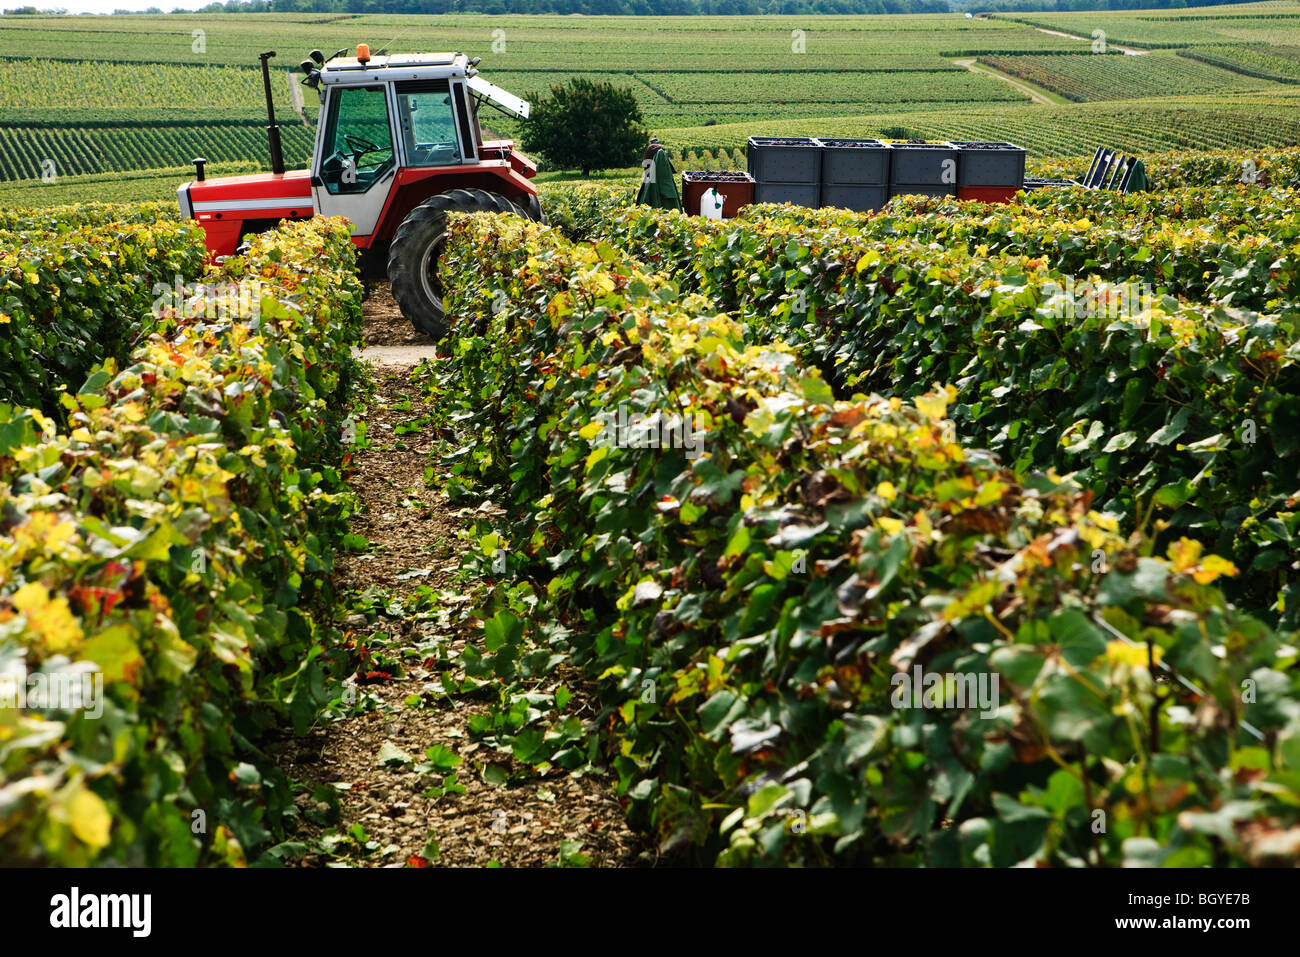 Field of grapevines, tractor with load of harvested grapes in background Stock Photo